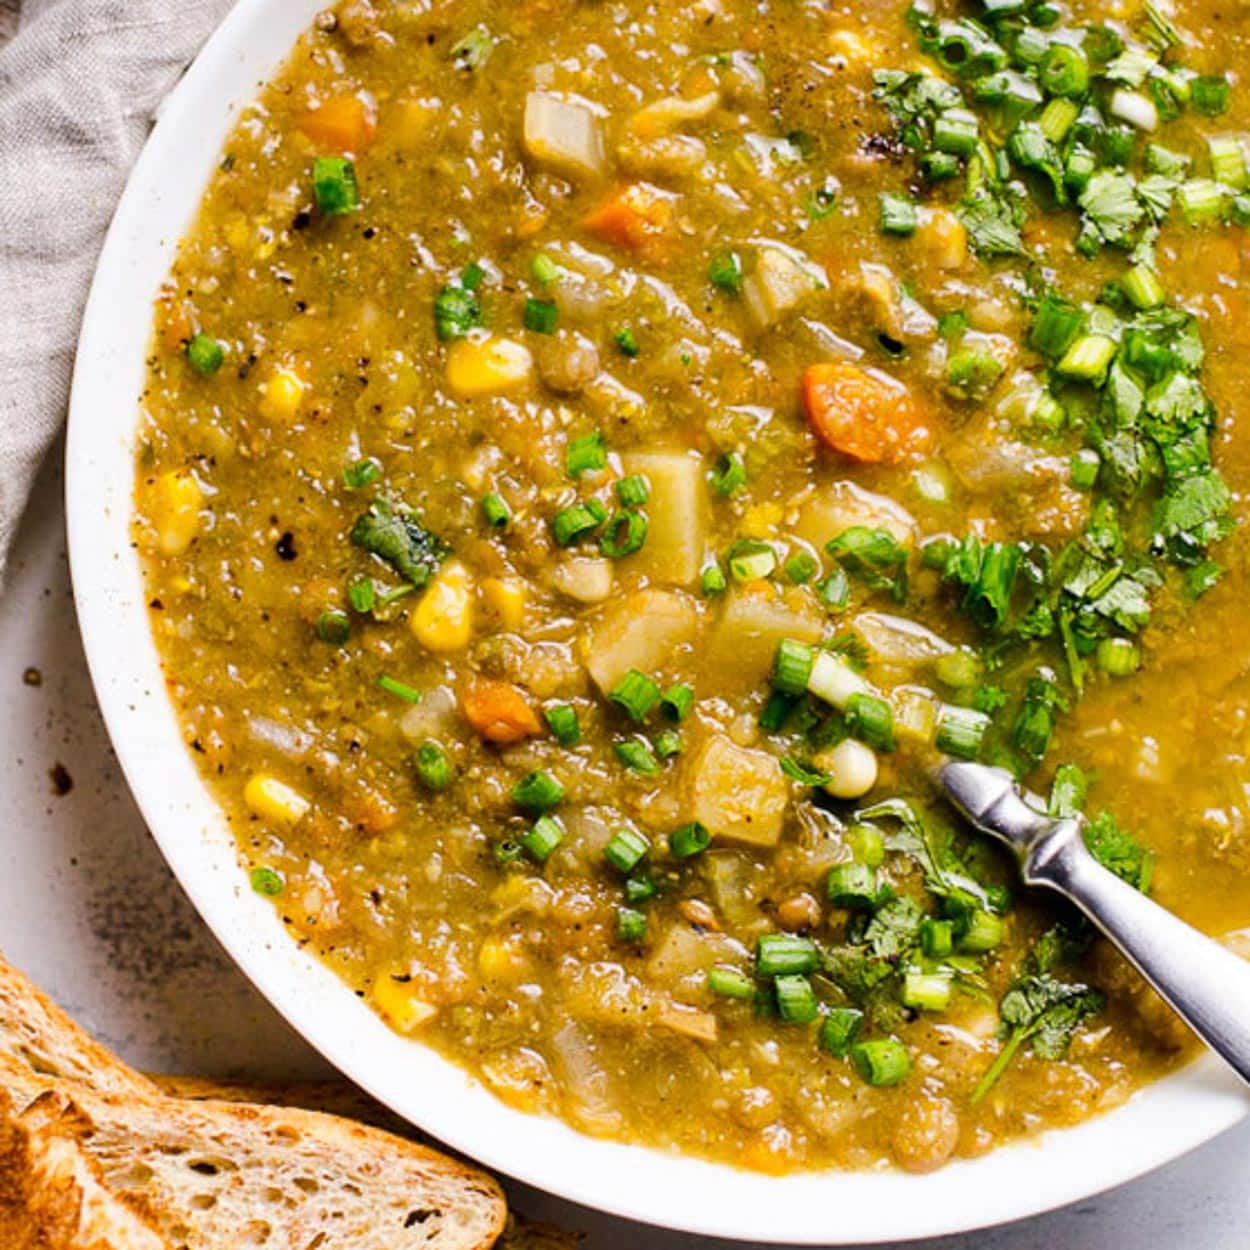 Slow cooker lentil soup with herbs in a bowl with a spoon and bread.